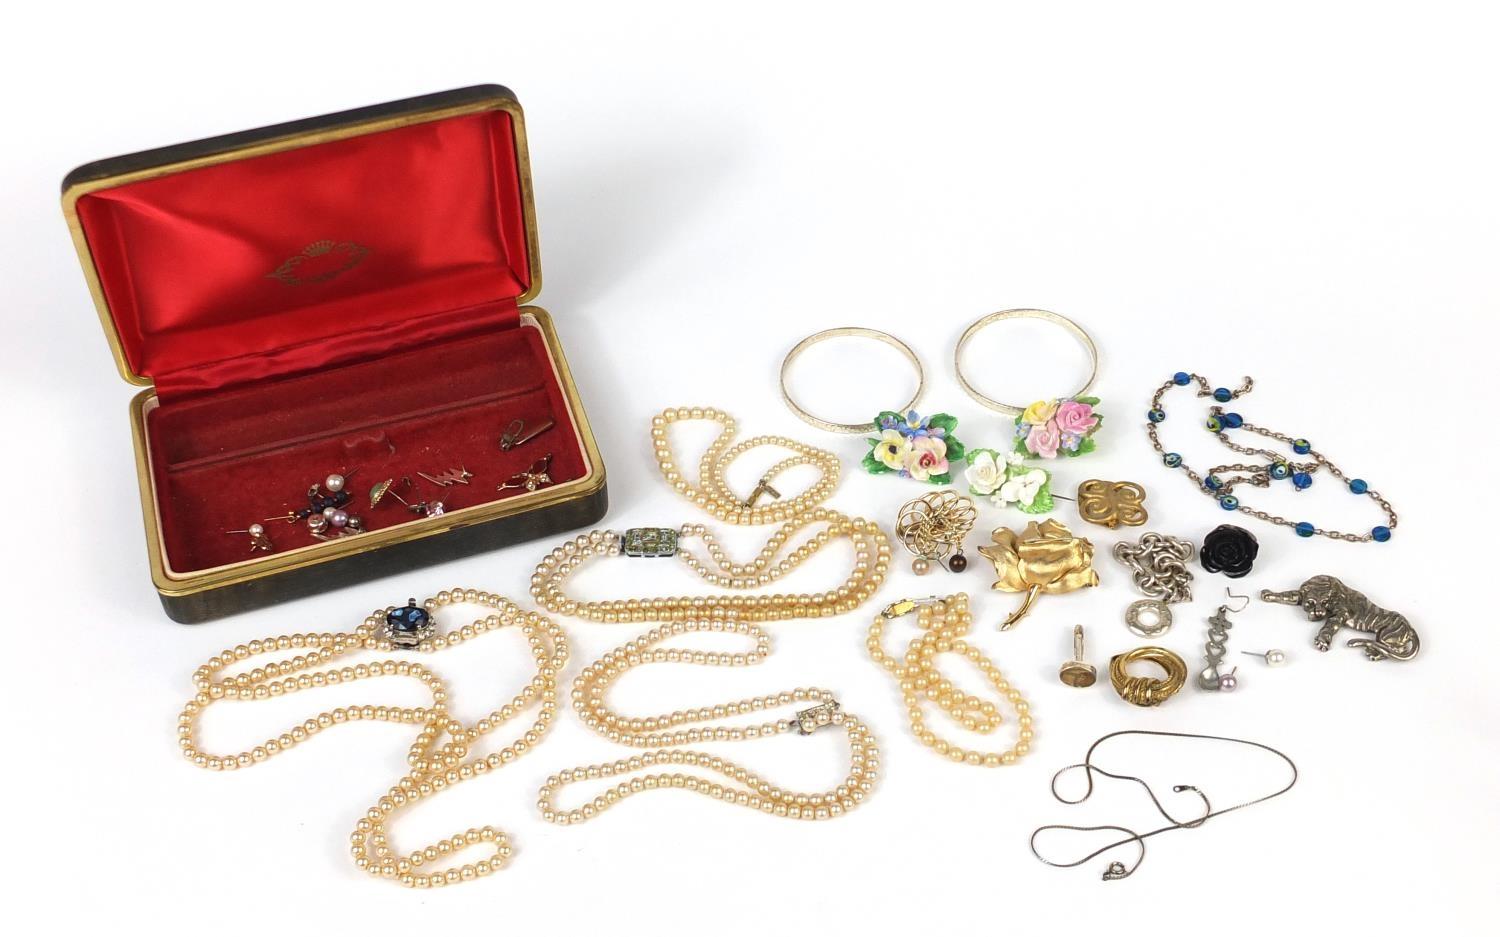 Costume jewellery including brooches, simulated pearl necklaces and earrings : For Further Condition